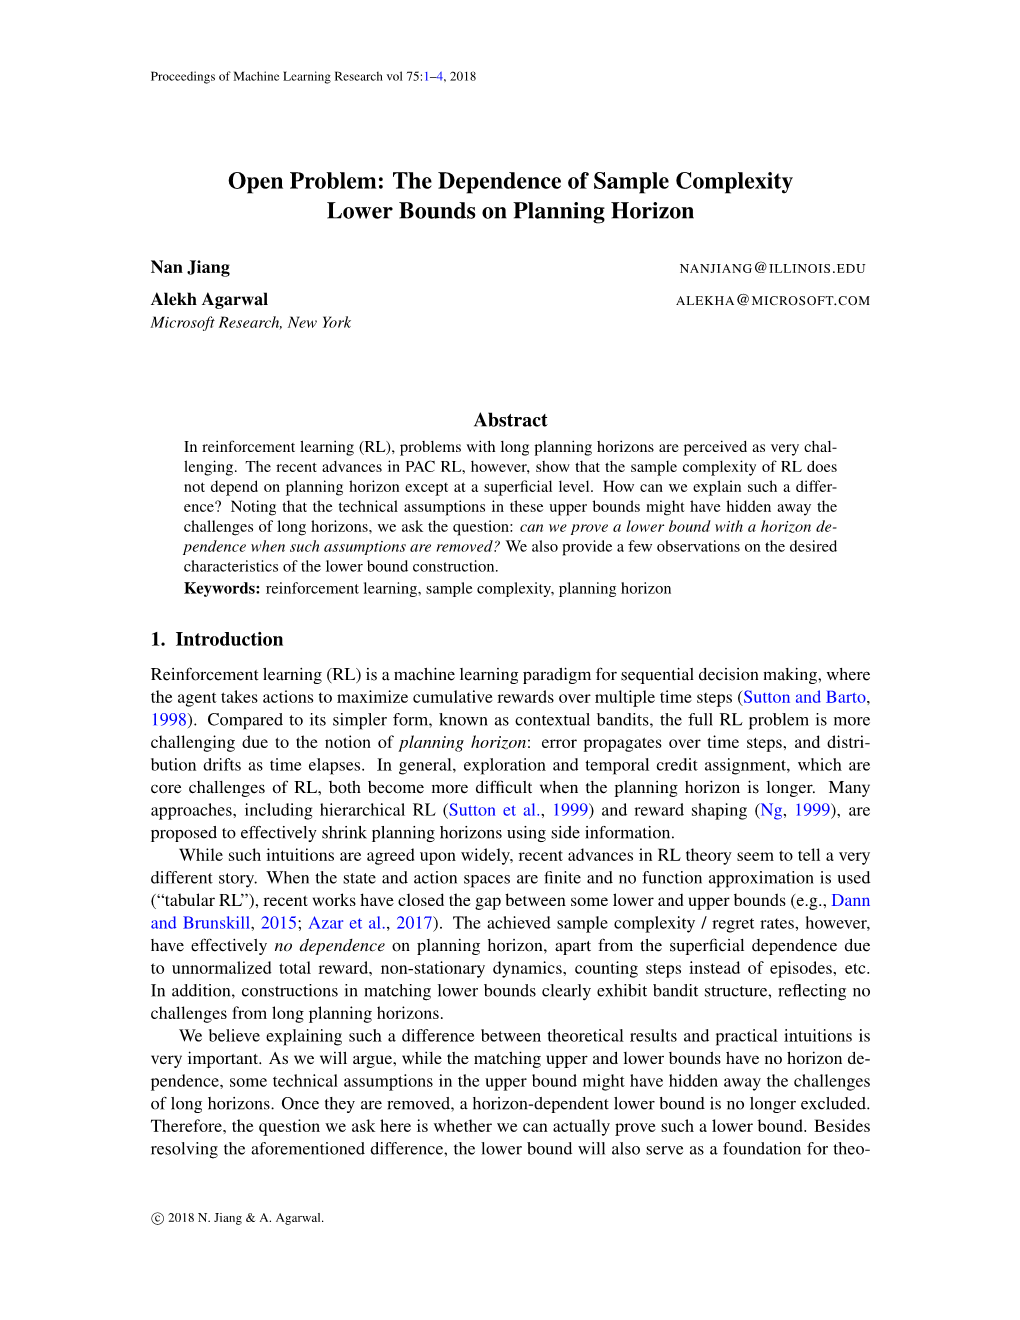 Open Problem: the Dependence of Sample Complexity Lower Bounds on Planning Horizon